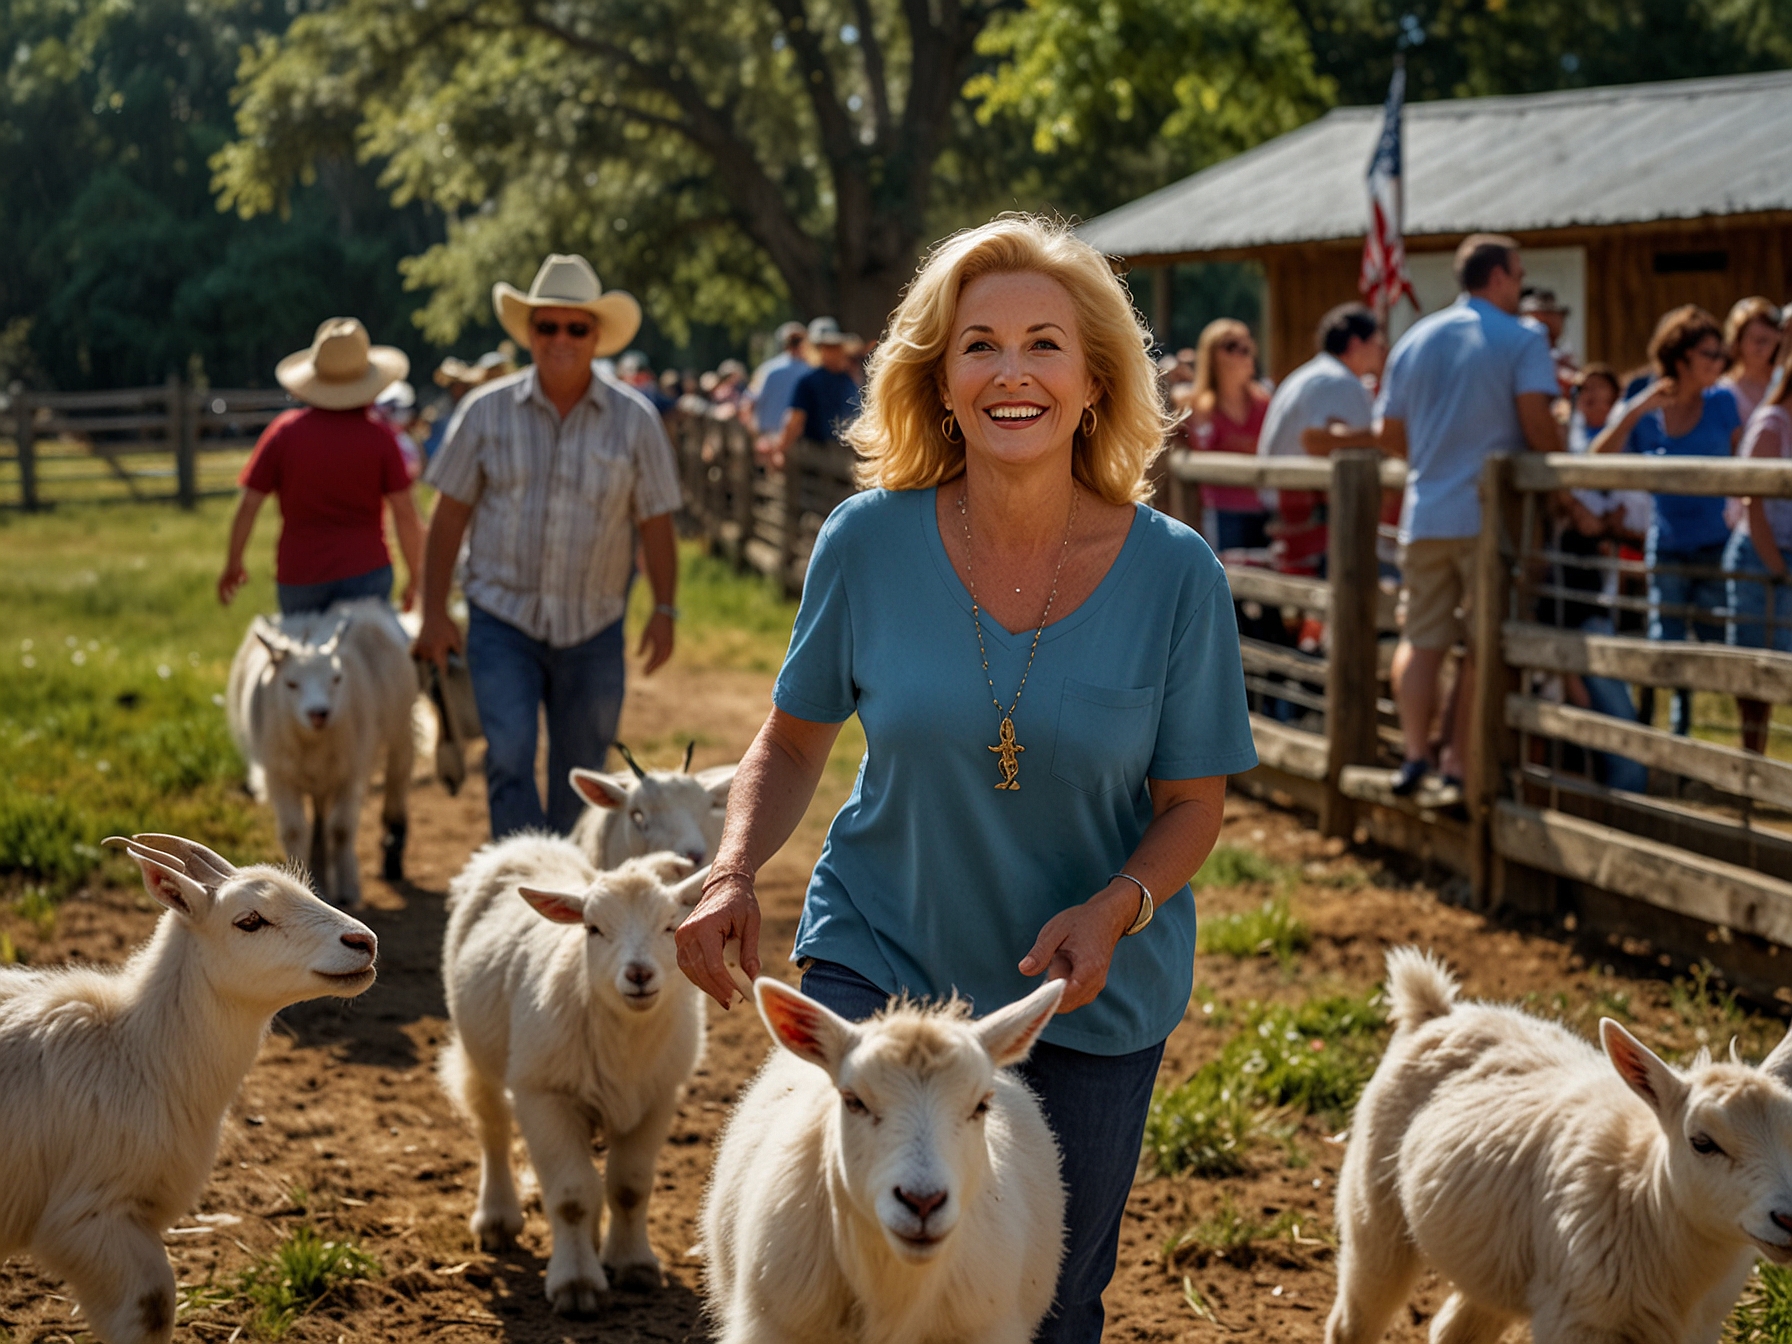 Rosemarie leads the 'Goat Parade' at Cajun Corral Farm, charming visitors with playful antics as families watch and take photos of the joyful animals.